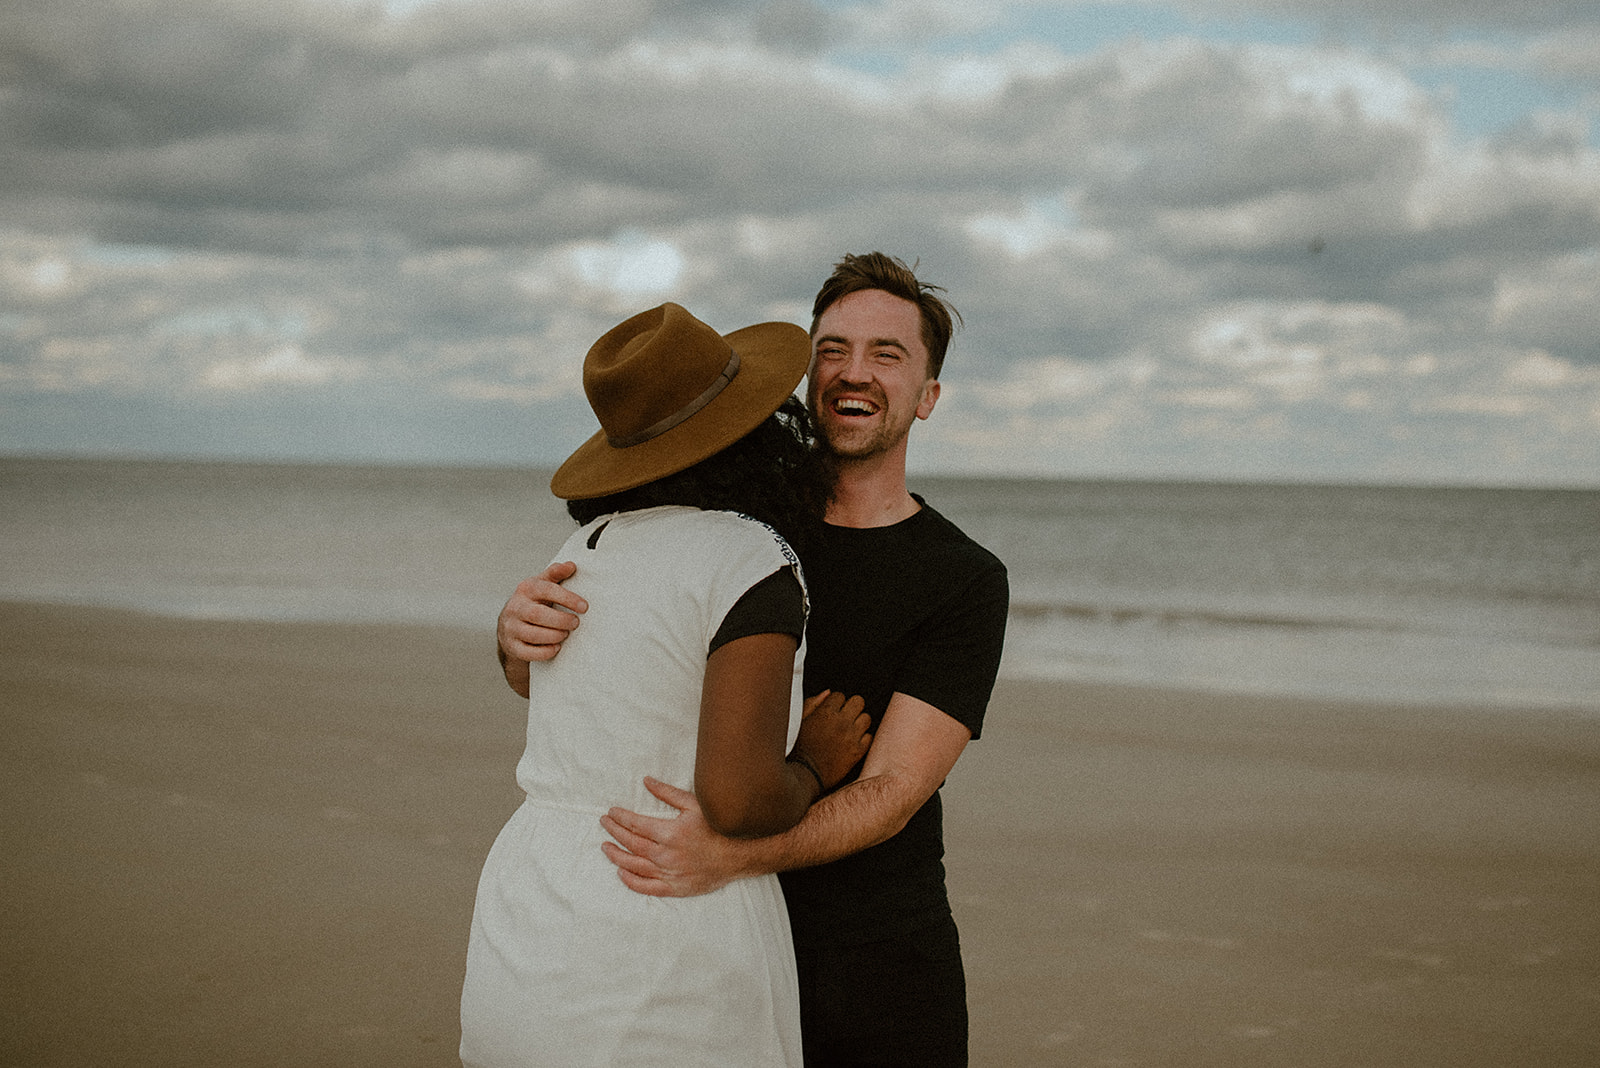 Anniversary couples session in Tybee Island